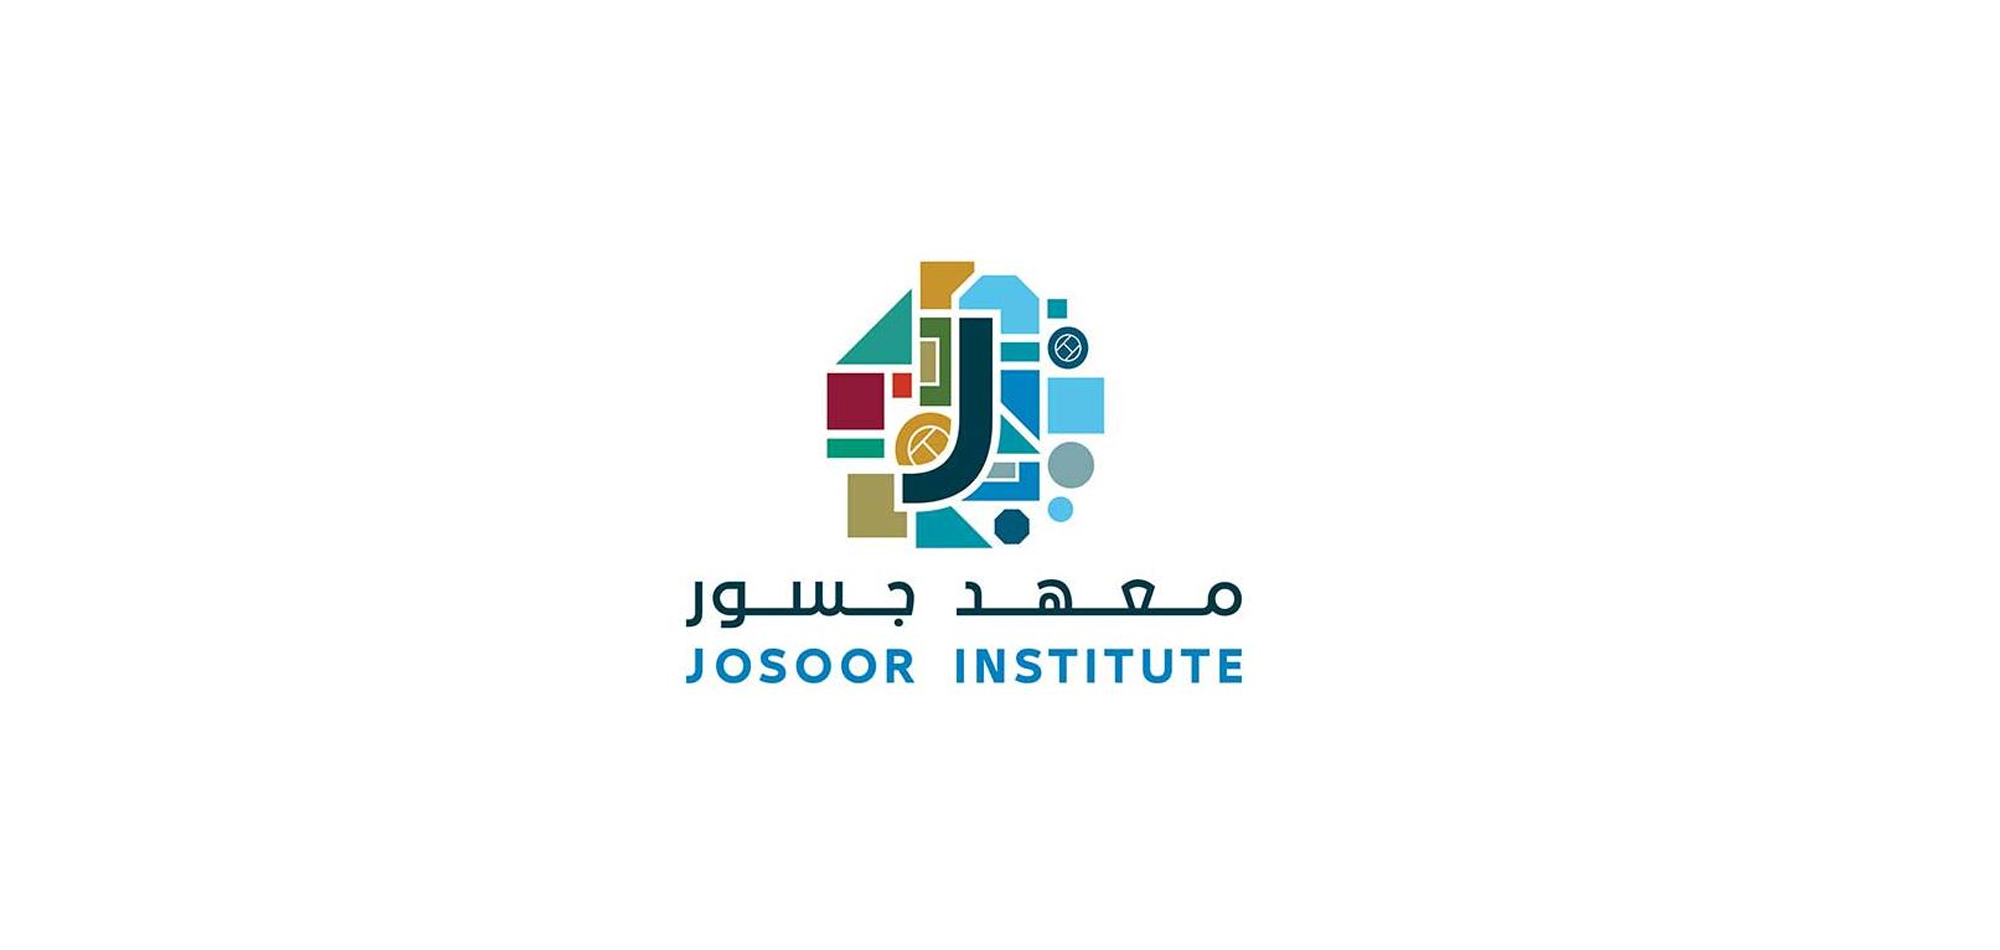 Josoor Institute opens applications for new cohort of diploma programmes